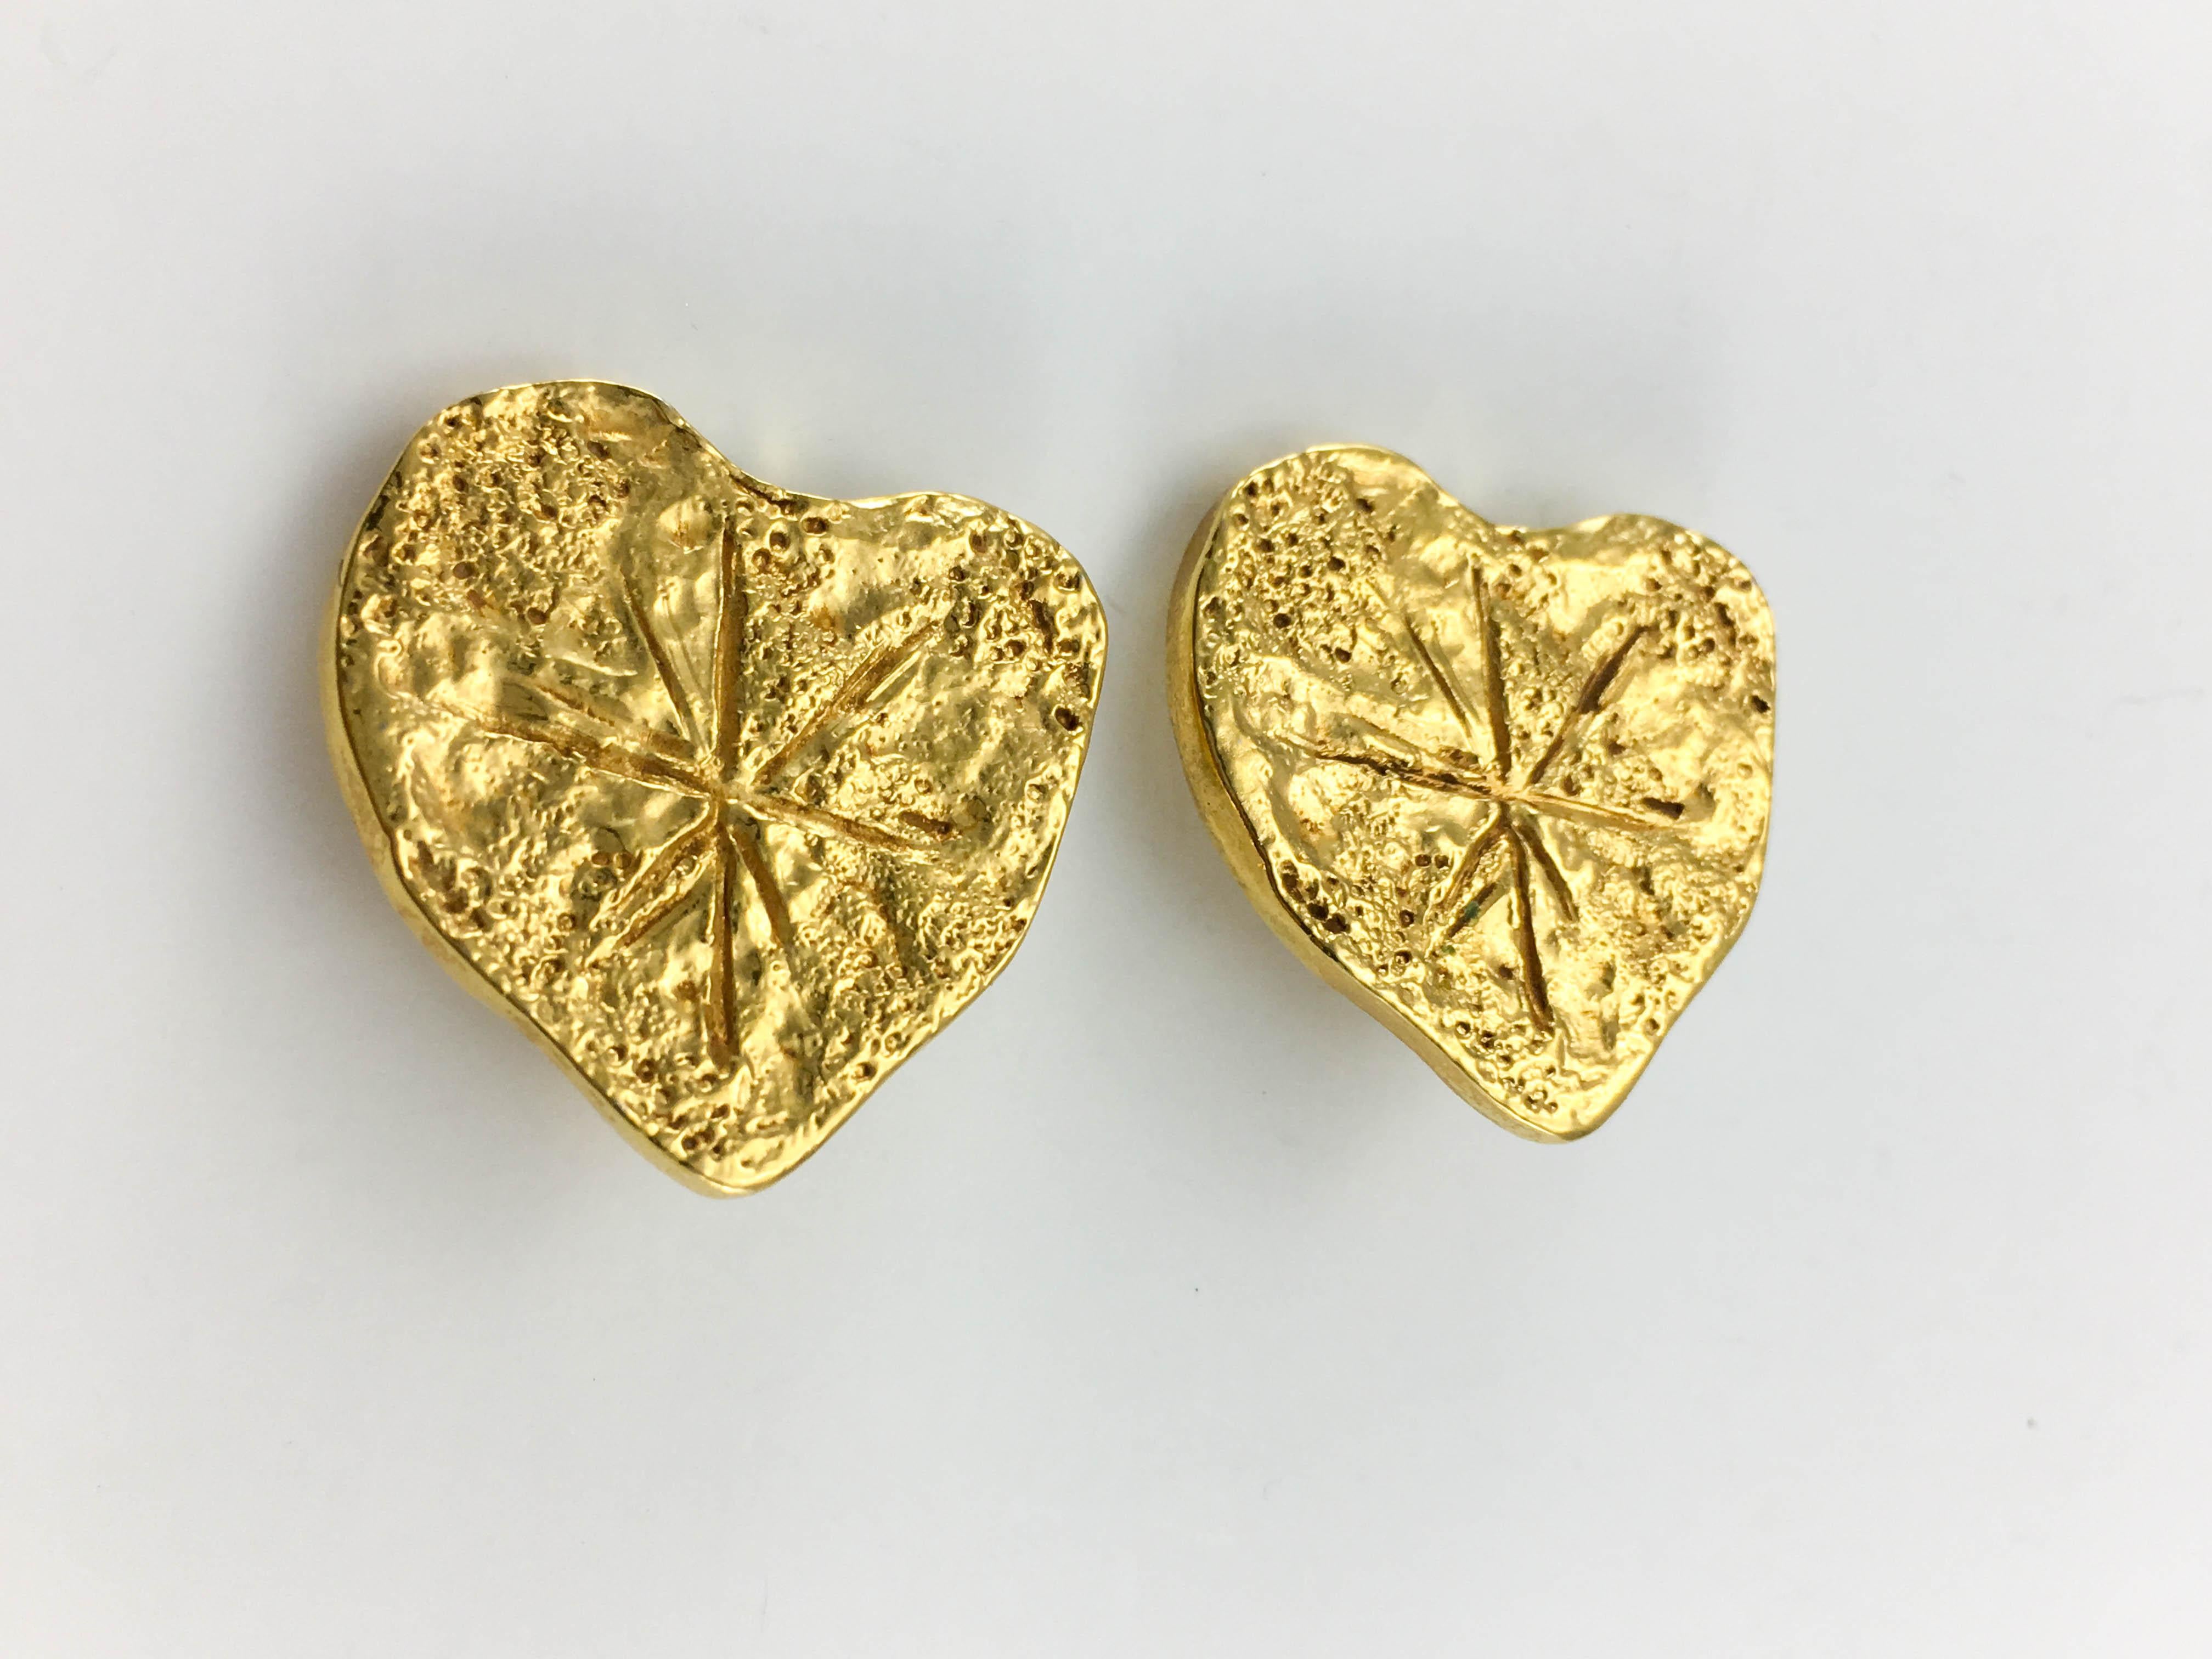 1994 Christian Lacroix Gold-Plated Modernist Heart Earrings For Sale 1